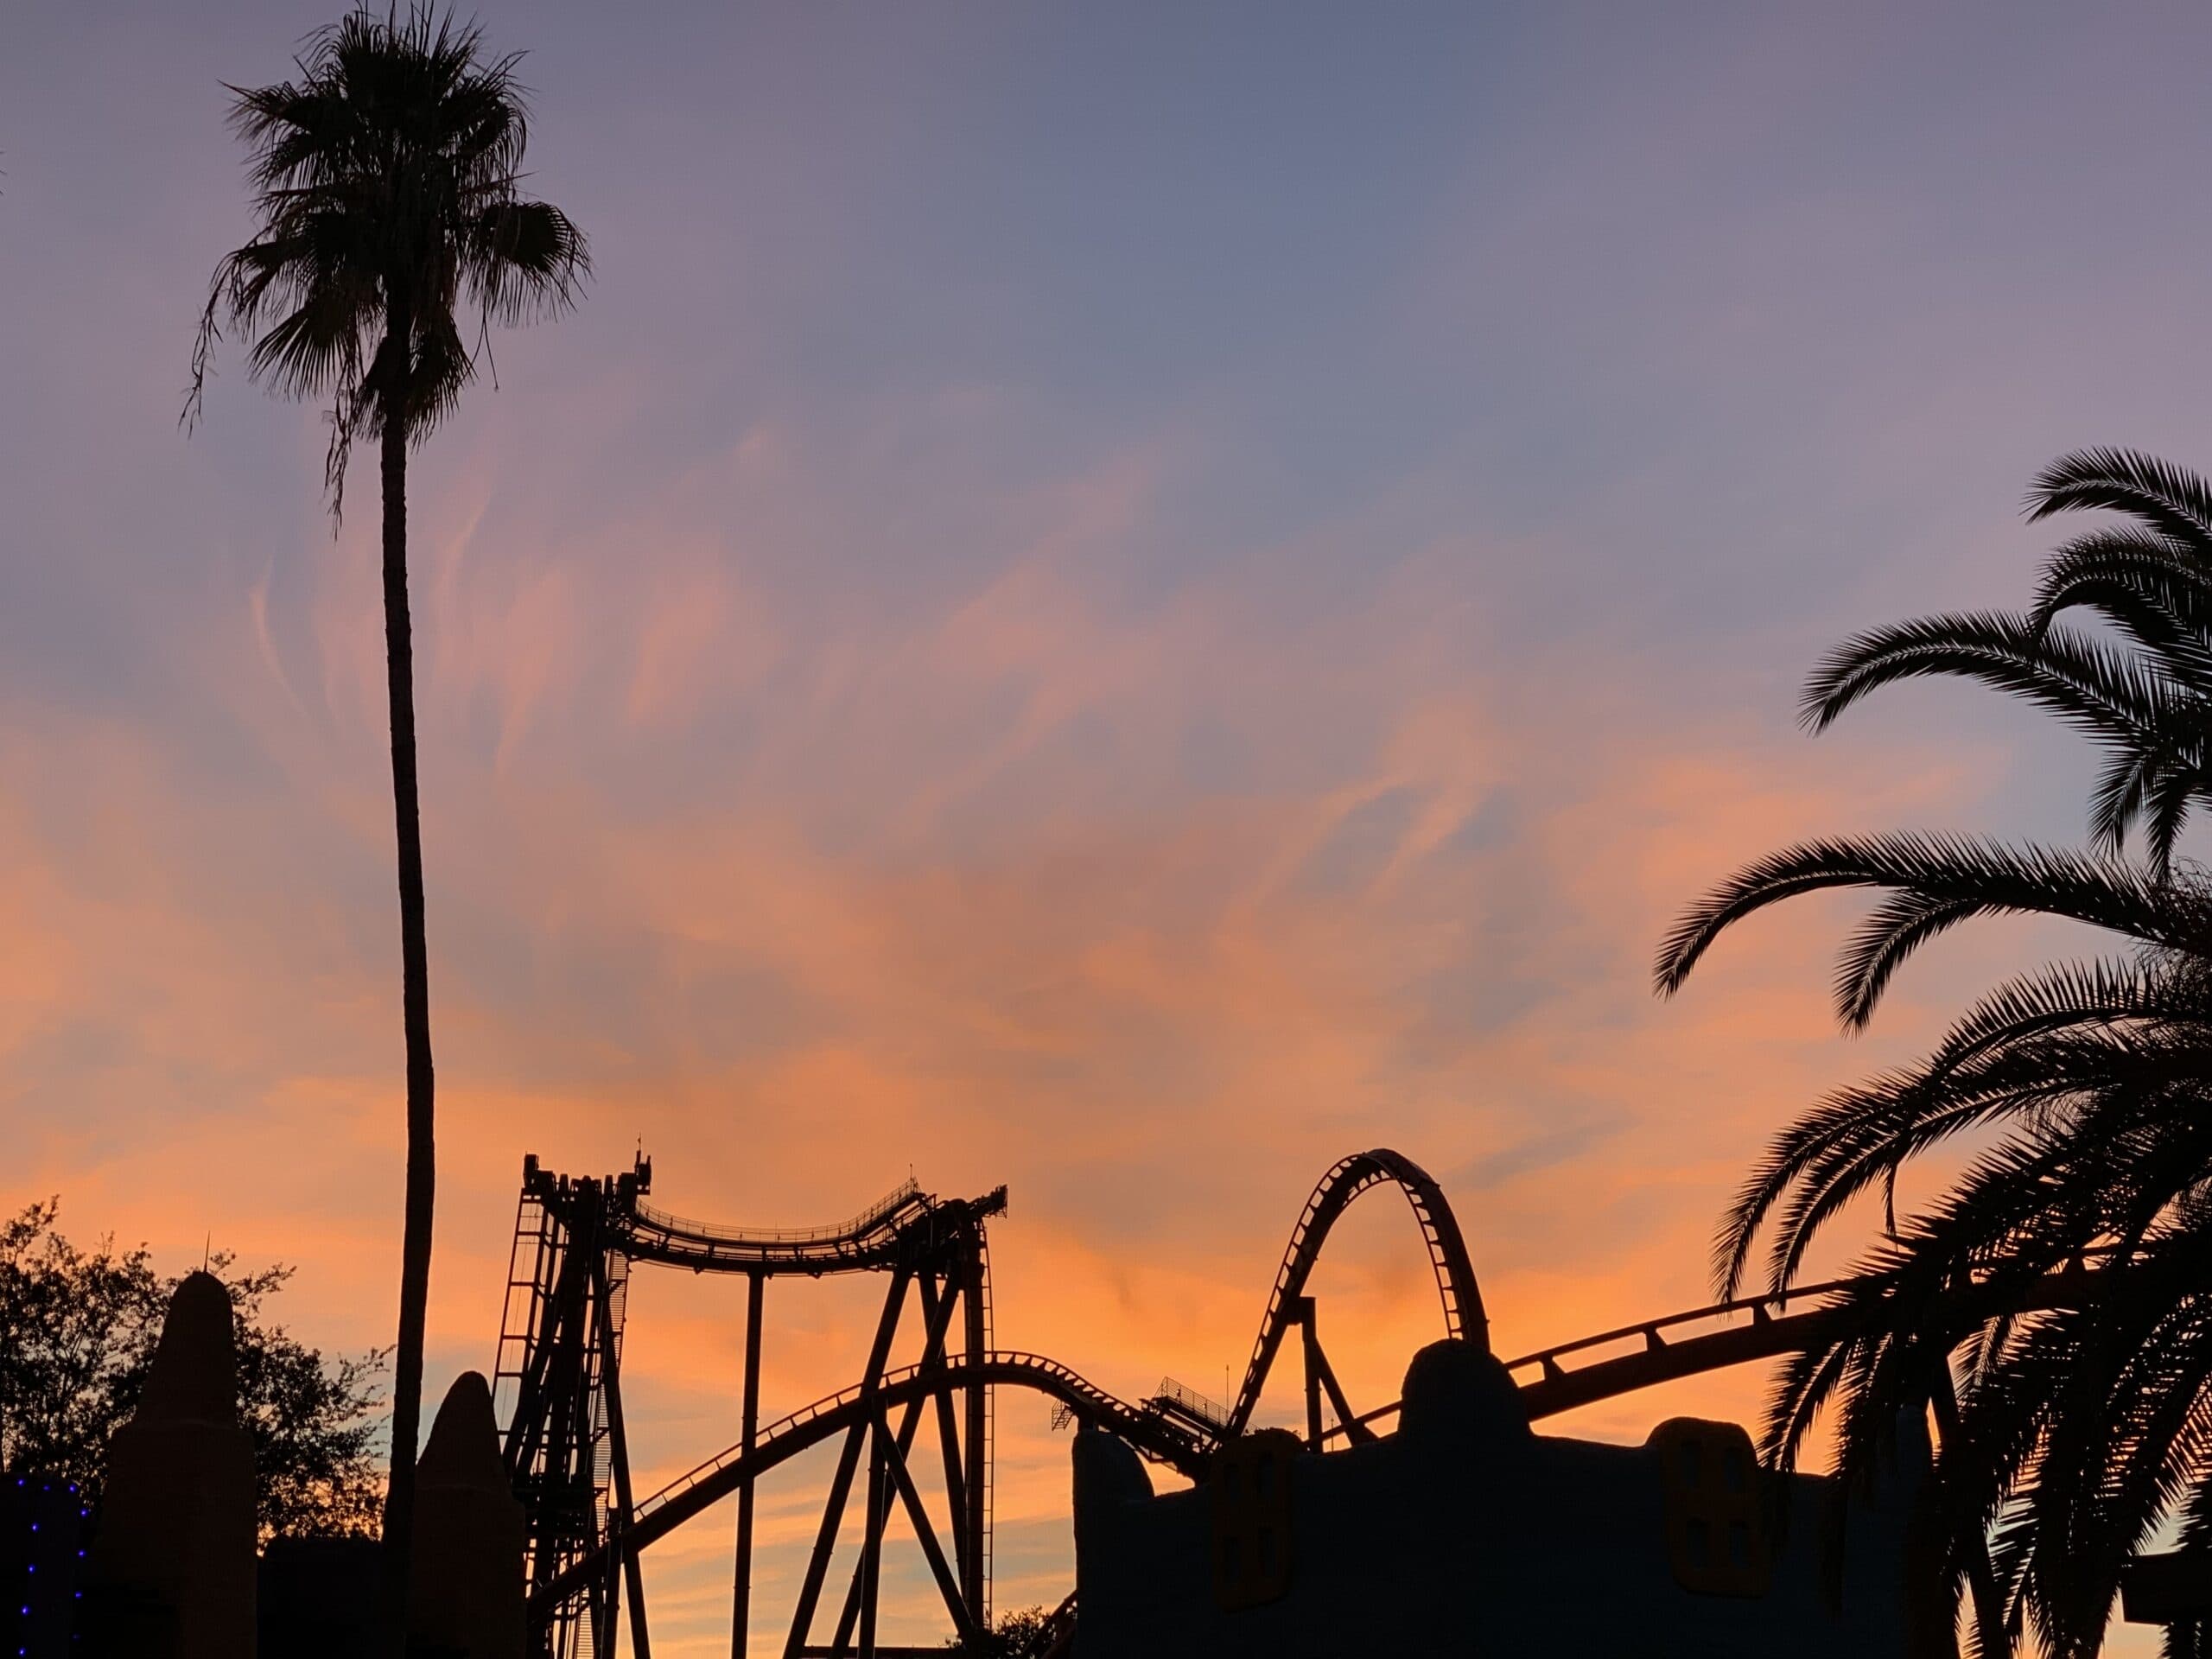 sunset over a theme park roller coaster